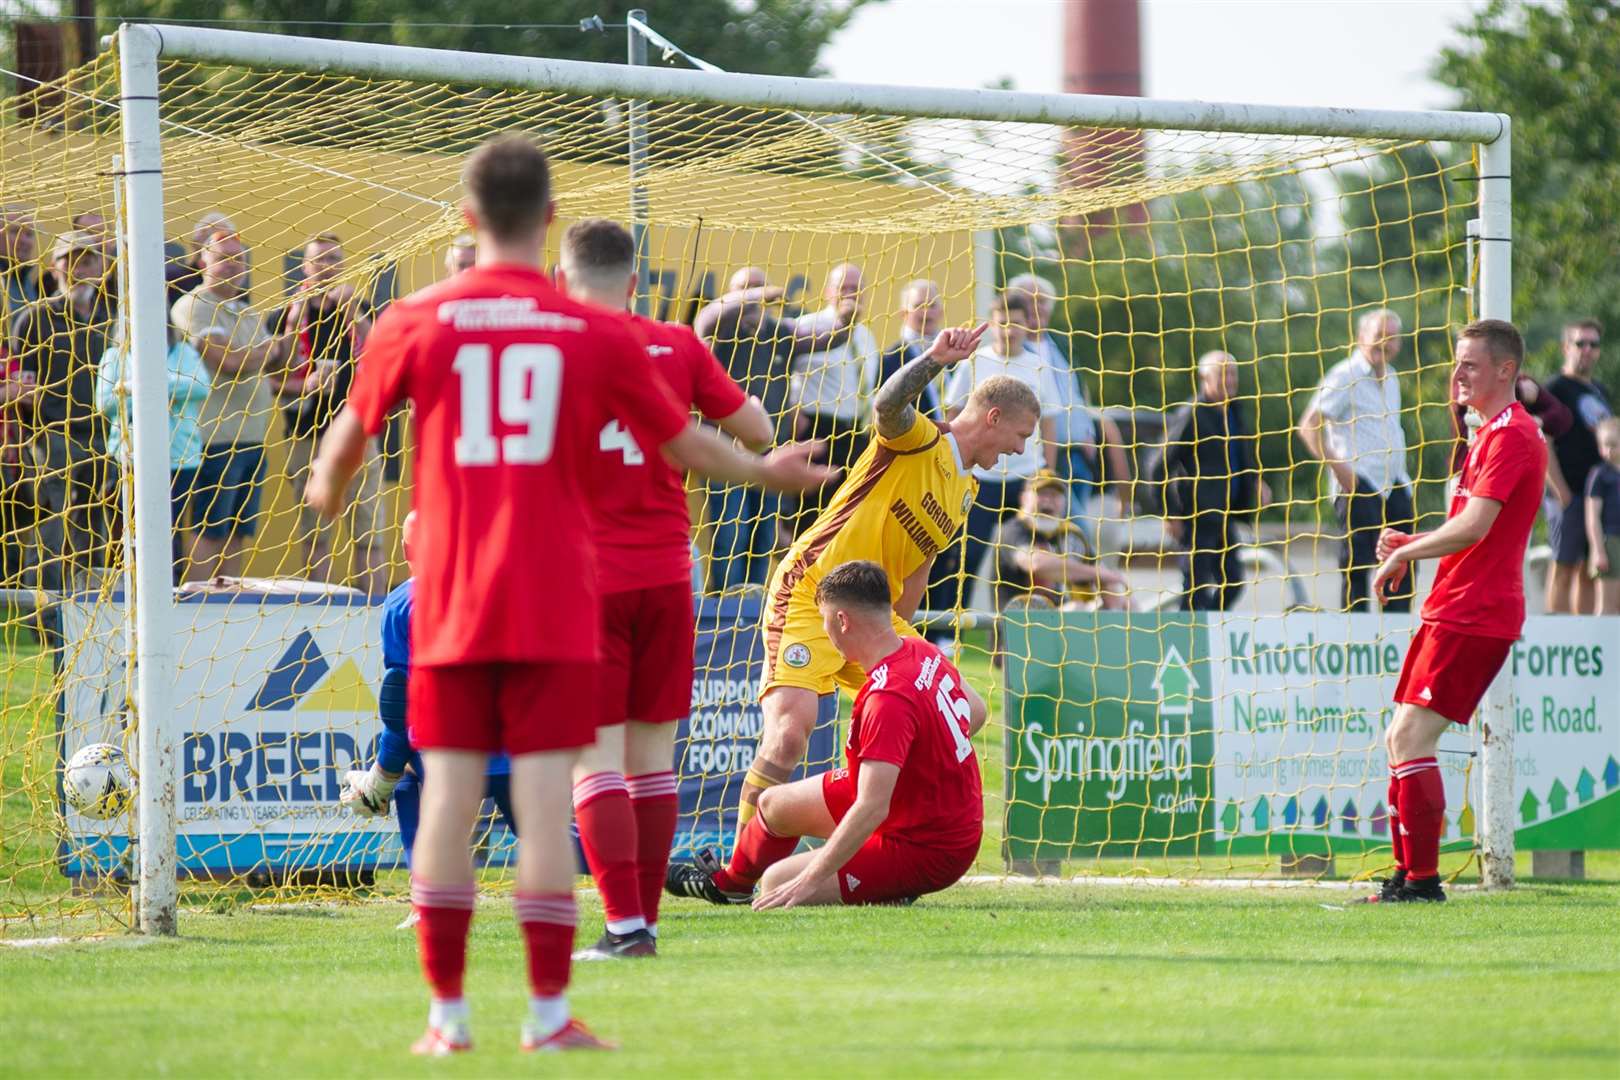 Forres frontman Lee Fraser pokes the ball home from close range scoring the only goal of the afternoon. ..Forres Mechanics FC (1) vs Lossiemouth FC (0) - Highland Football League - Mosset Park, Forres 28/08/2021...Picture: Daniel Forsyth..